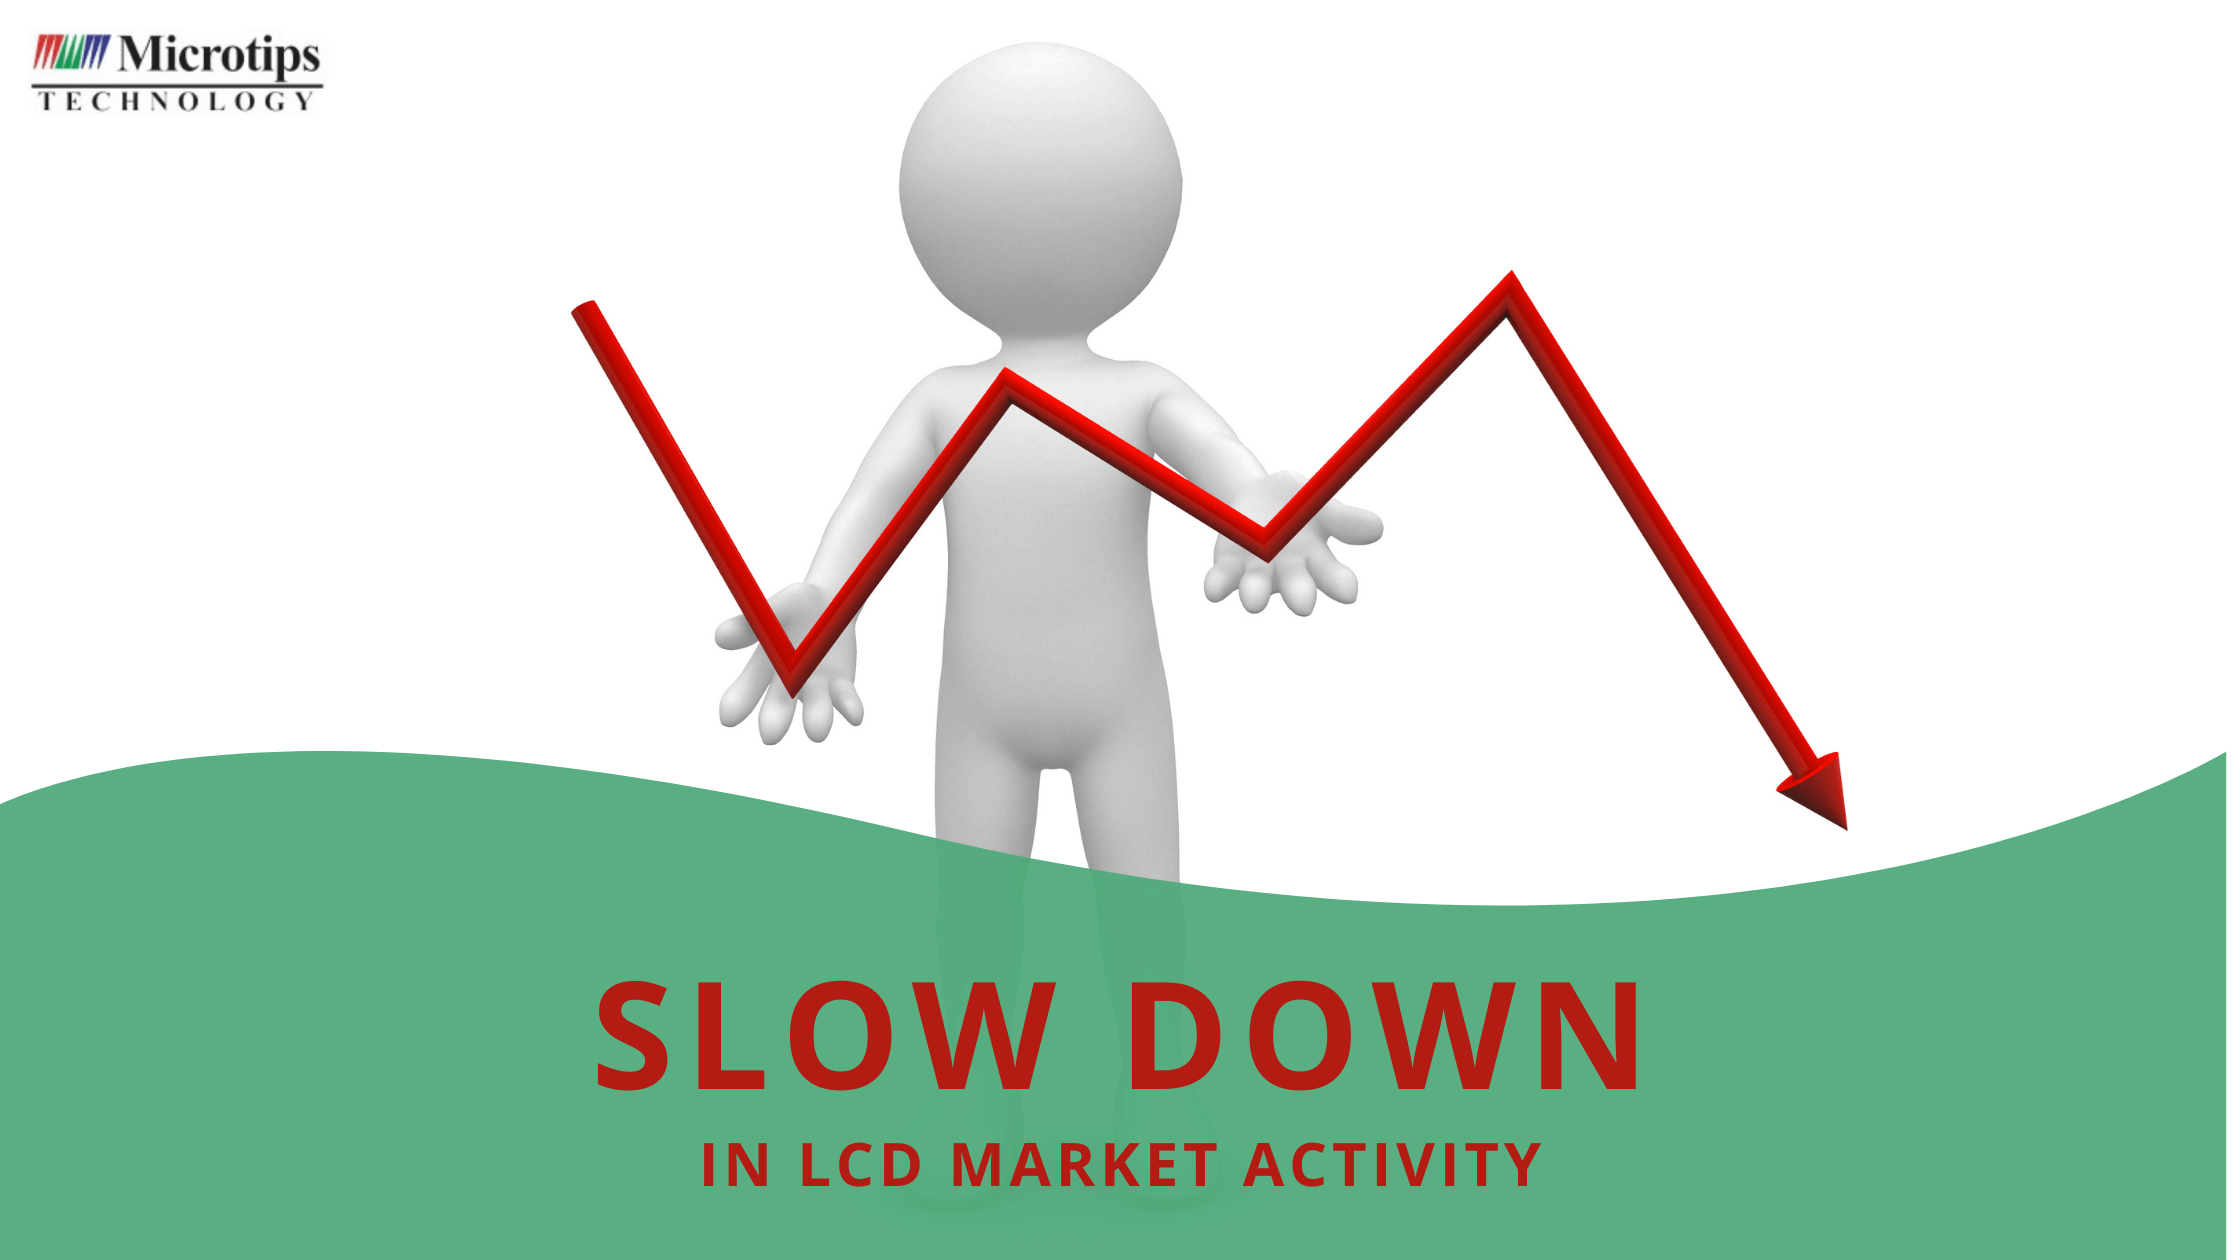 SLOW DOWN IN LCD MARKET ACTIVITY